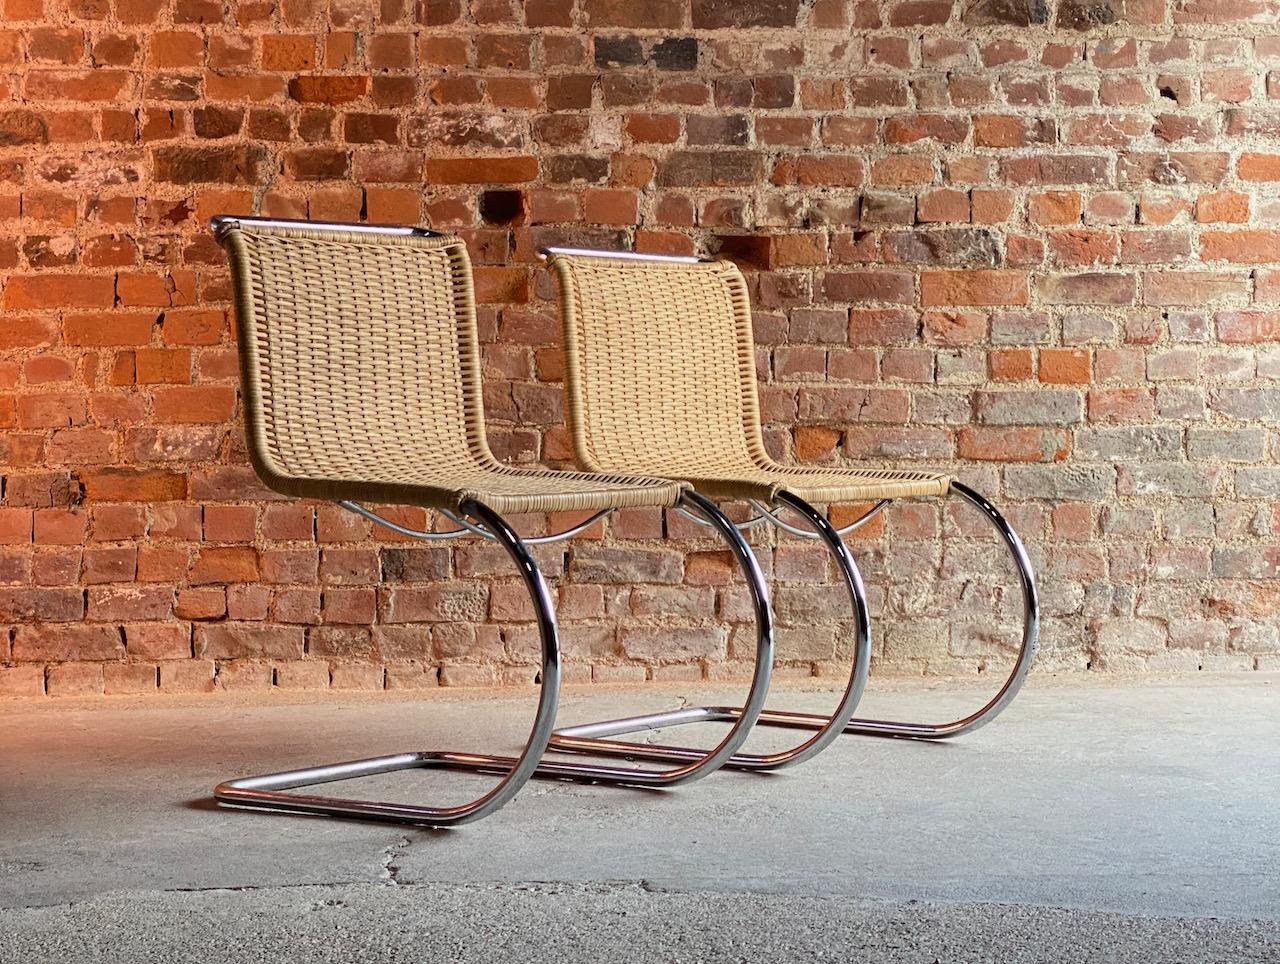 Mies van der Rohe MR10 rattan Cantilever chairs pair by Knoll, circa 1970

Stunning pair of Ludwig Mies van der Rohe MR10 rattan cantilever dining chairs by Knoll USA circa 1970s, the chairs offered in superb condition with new rattan on chrome